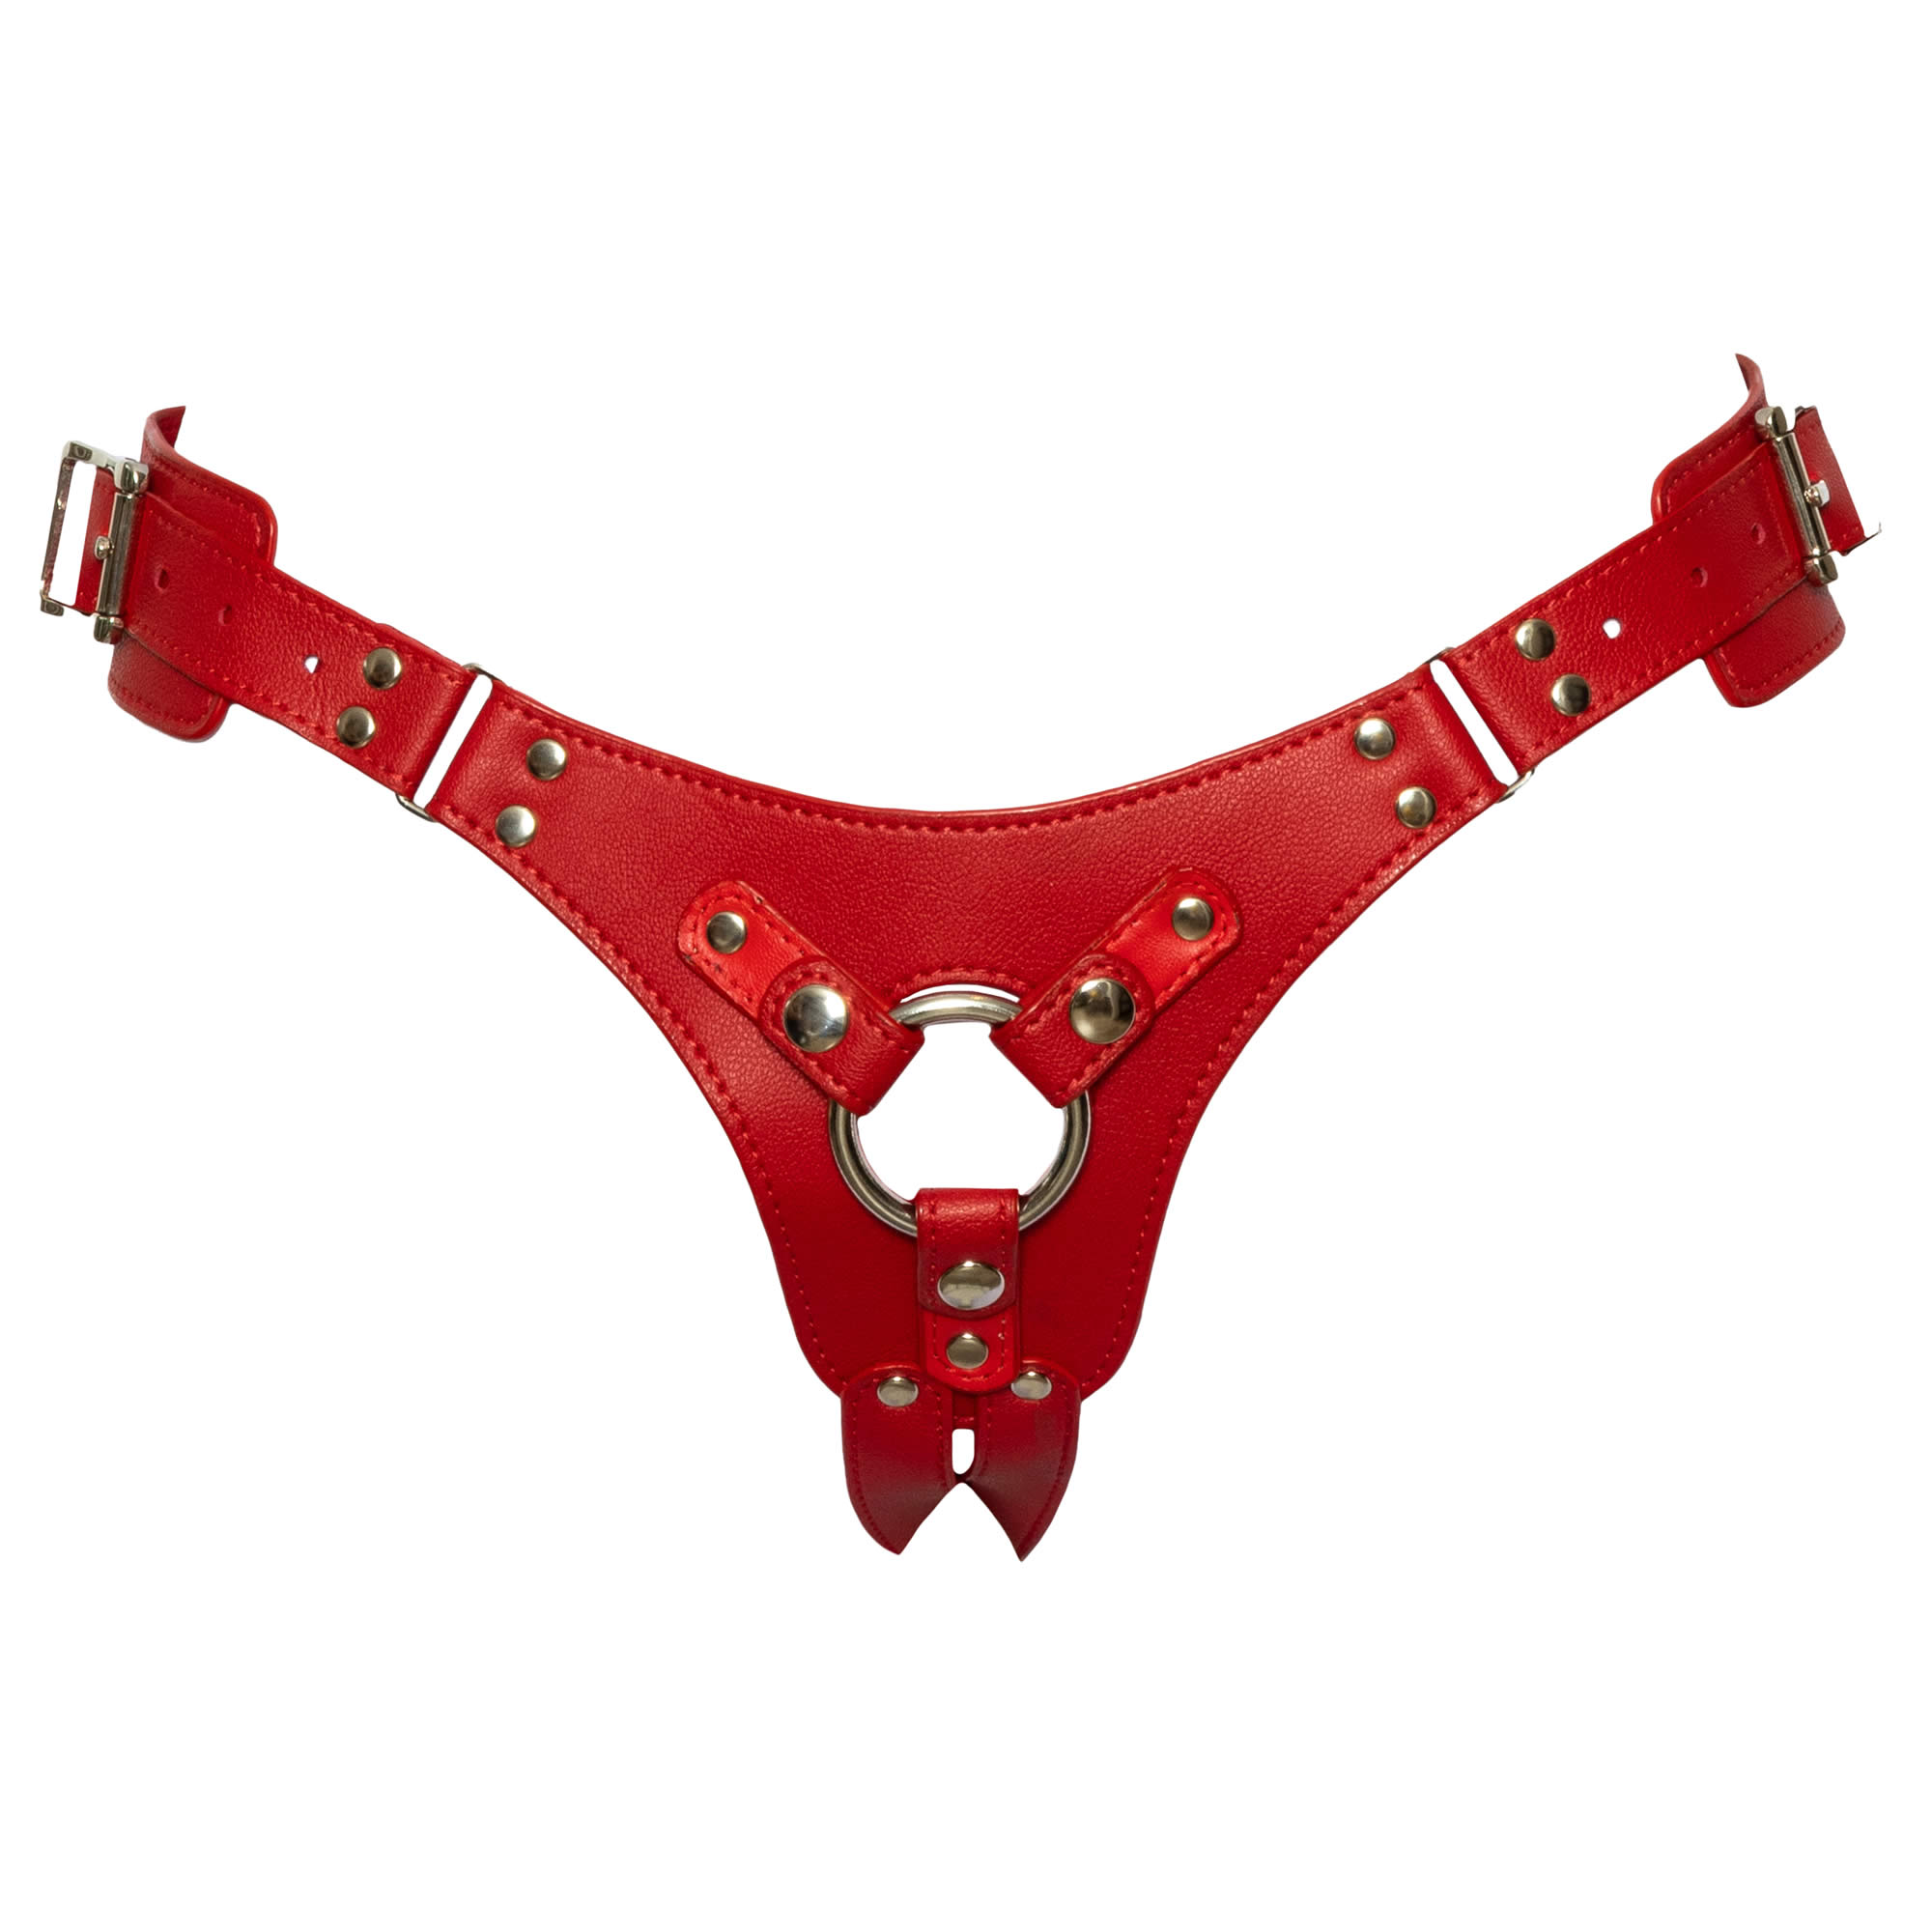 Bad Kitty Strap-On Harness in Red Leather Look